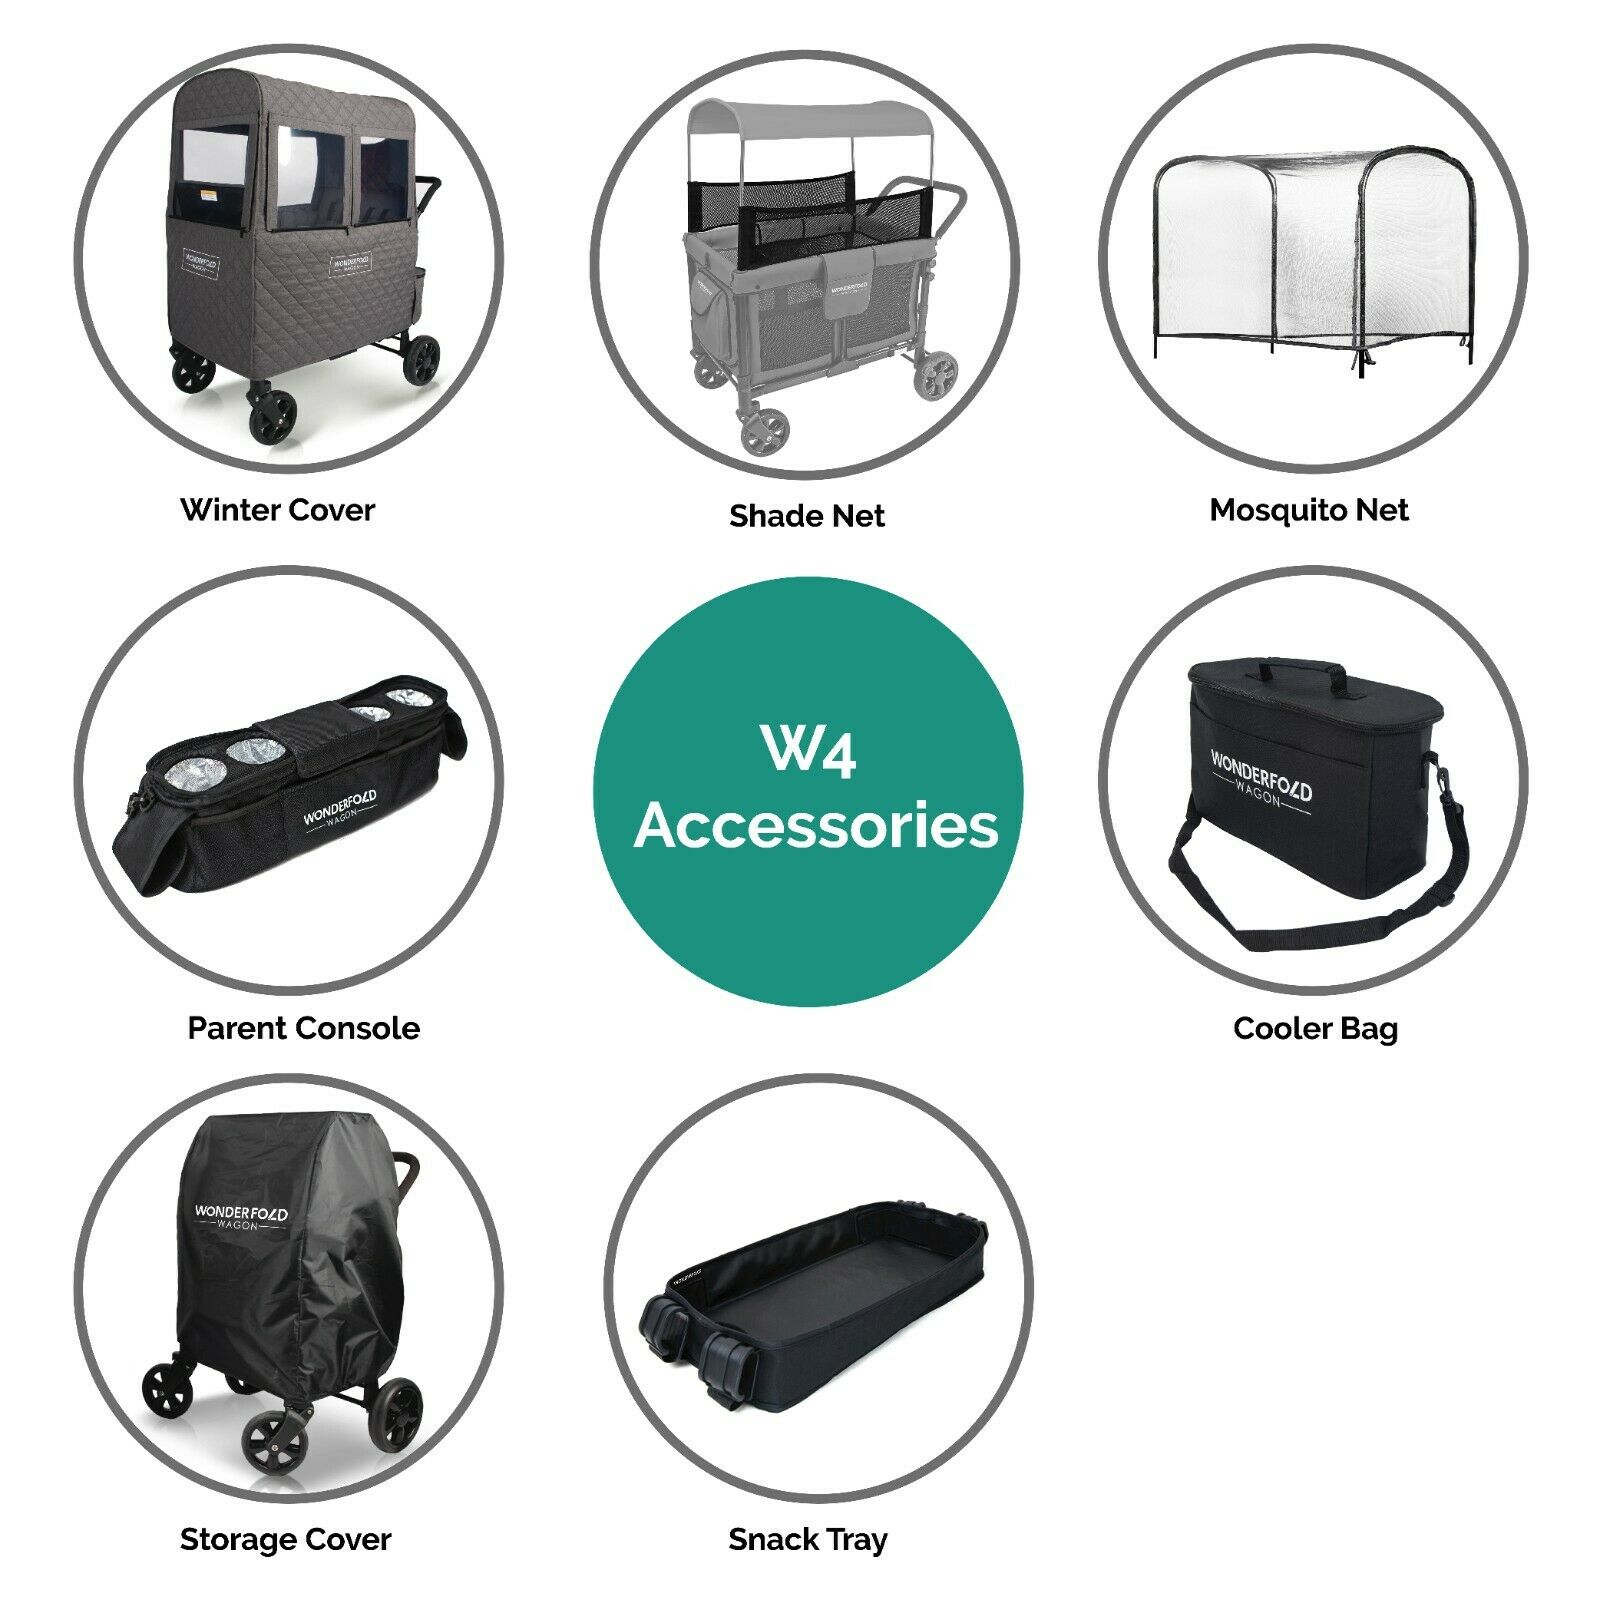 Wonderfold Wagon W-series And X-series Complete Accessories List